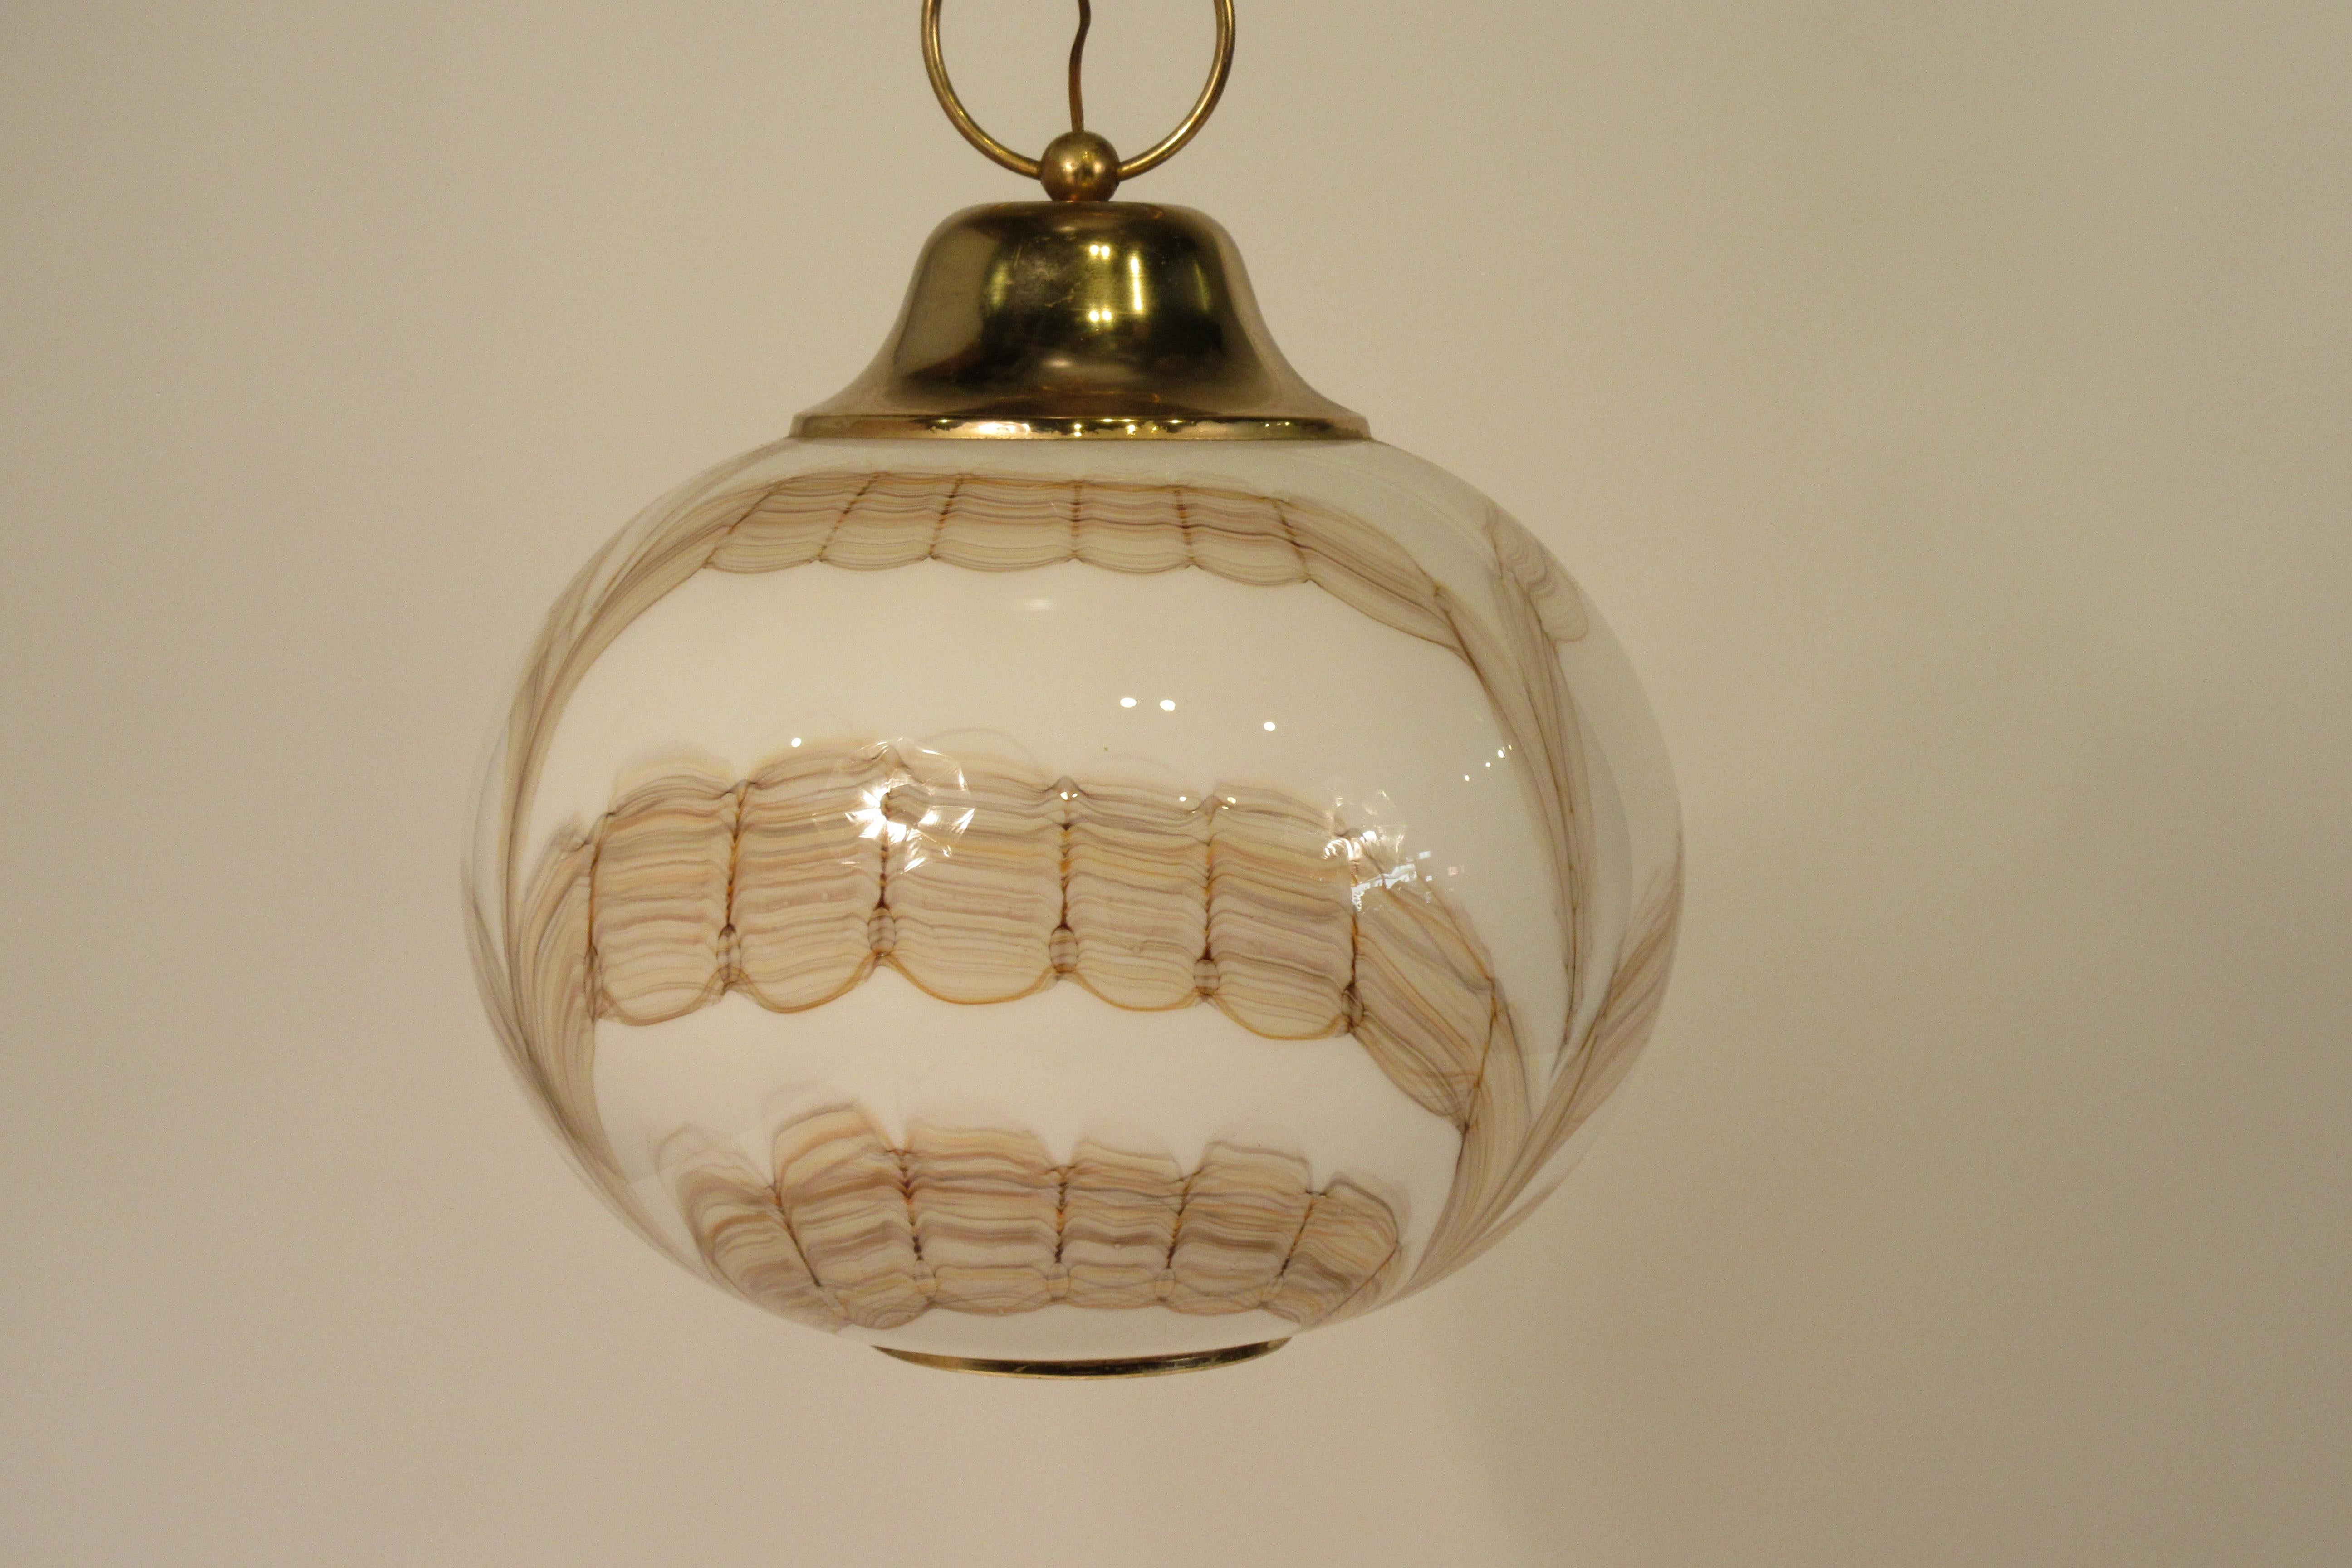 1970s Italian Murano Glass Ball Fixture In Good Condition For Sale In Tarrytown, NY